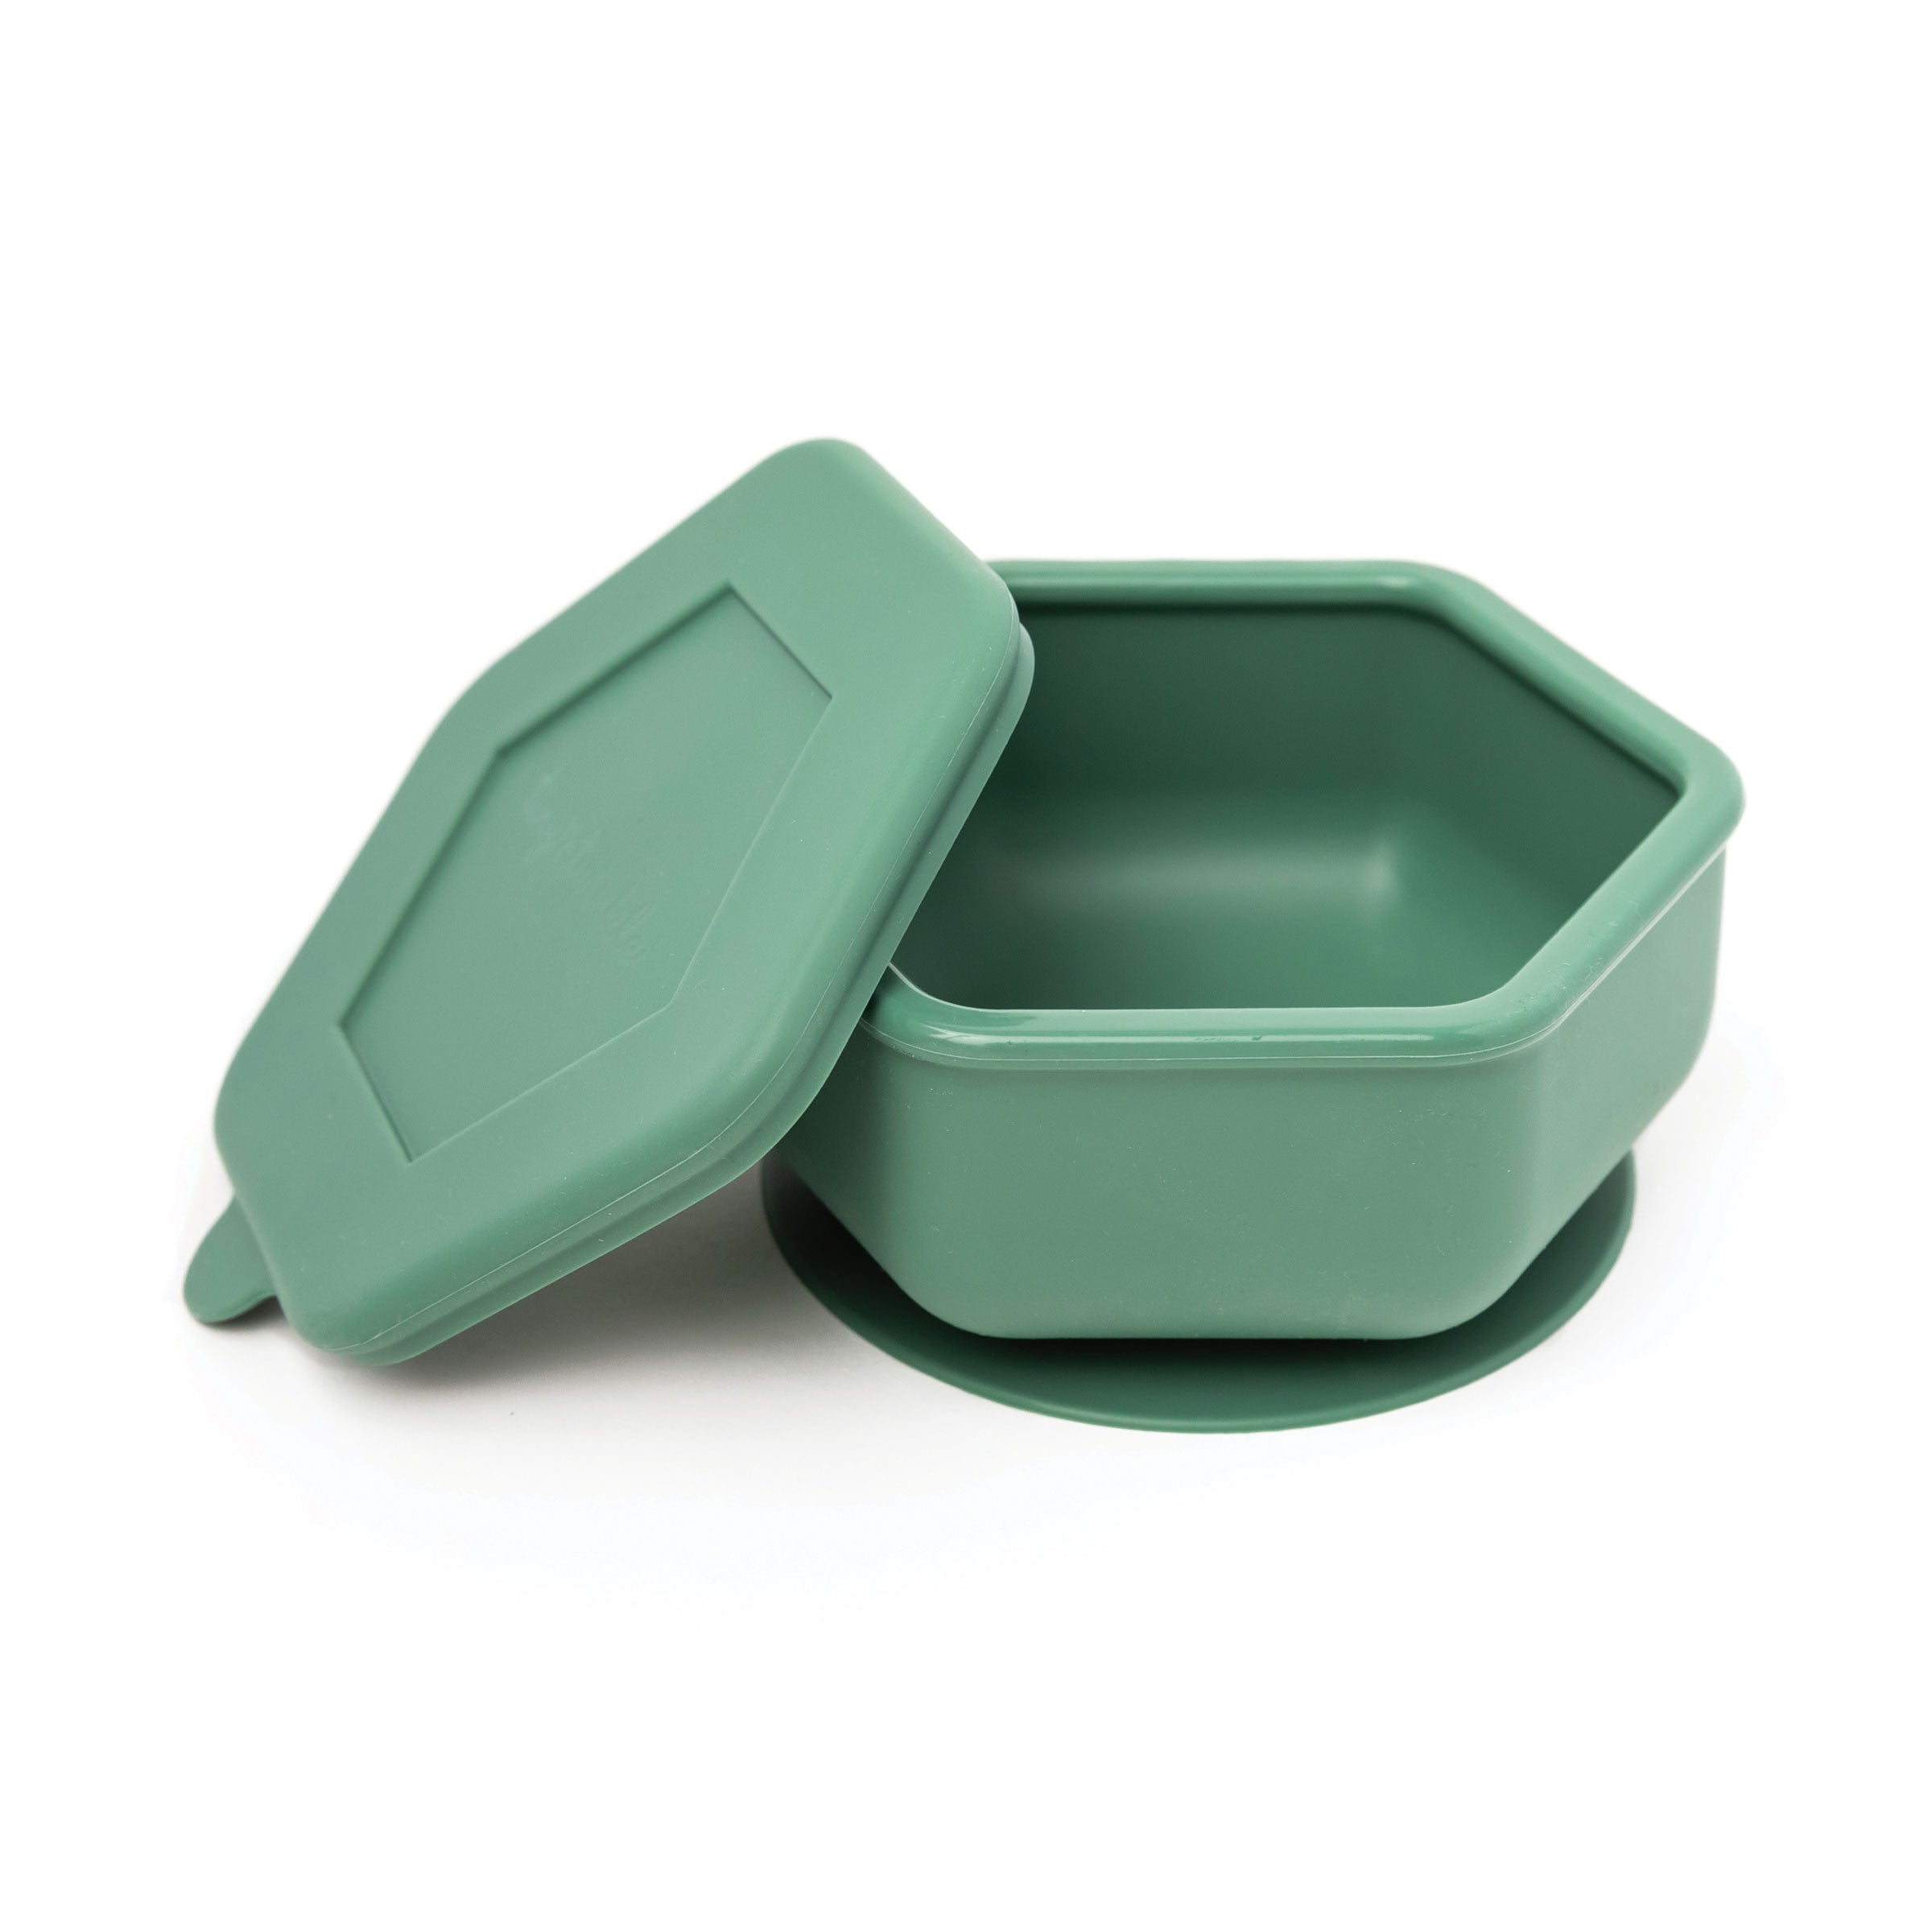 Suction Bowl and Lid